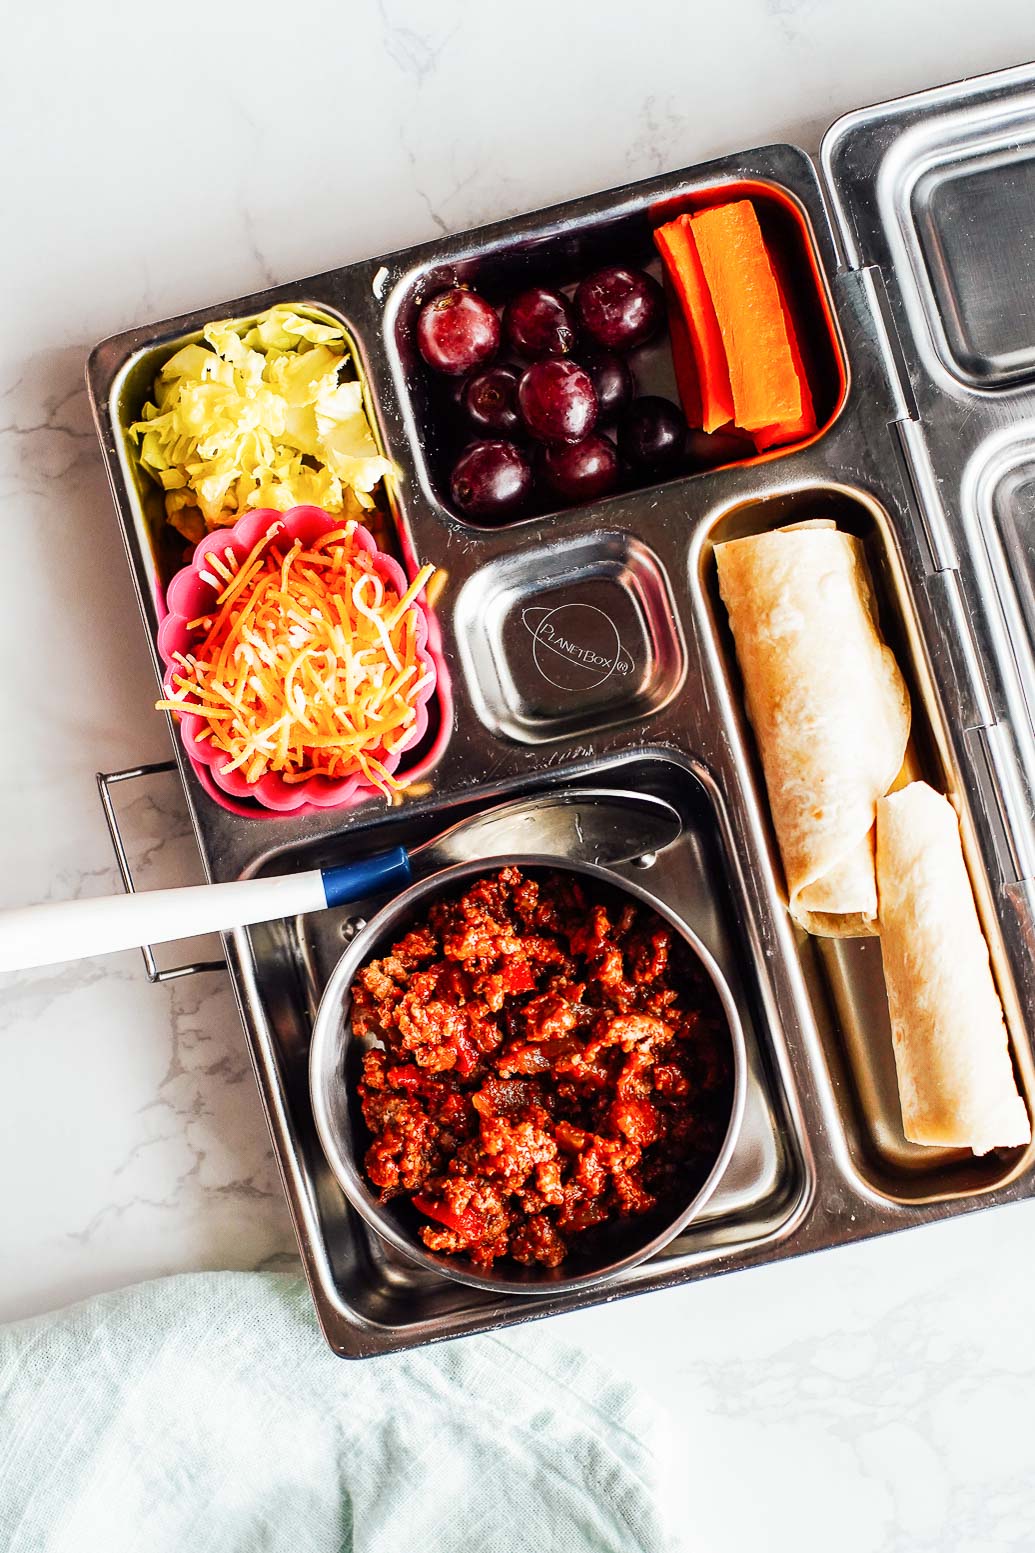 Build your own tacos: leftover ground beef taco meat with a spoon, tortilla on the side, shredded cheese, lettuce, grapes, and carrots in a bento box.